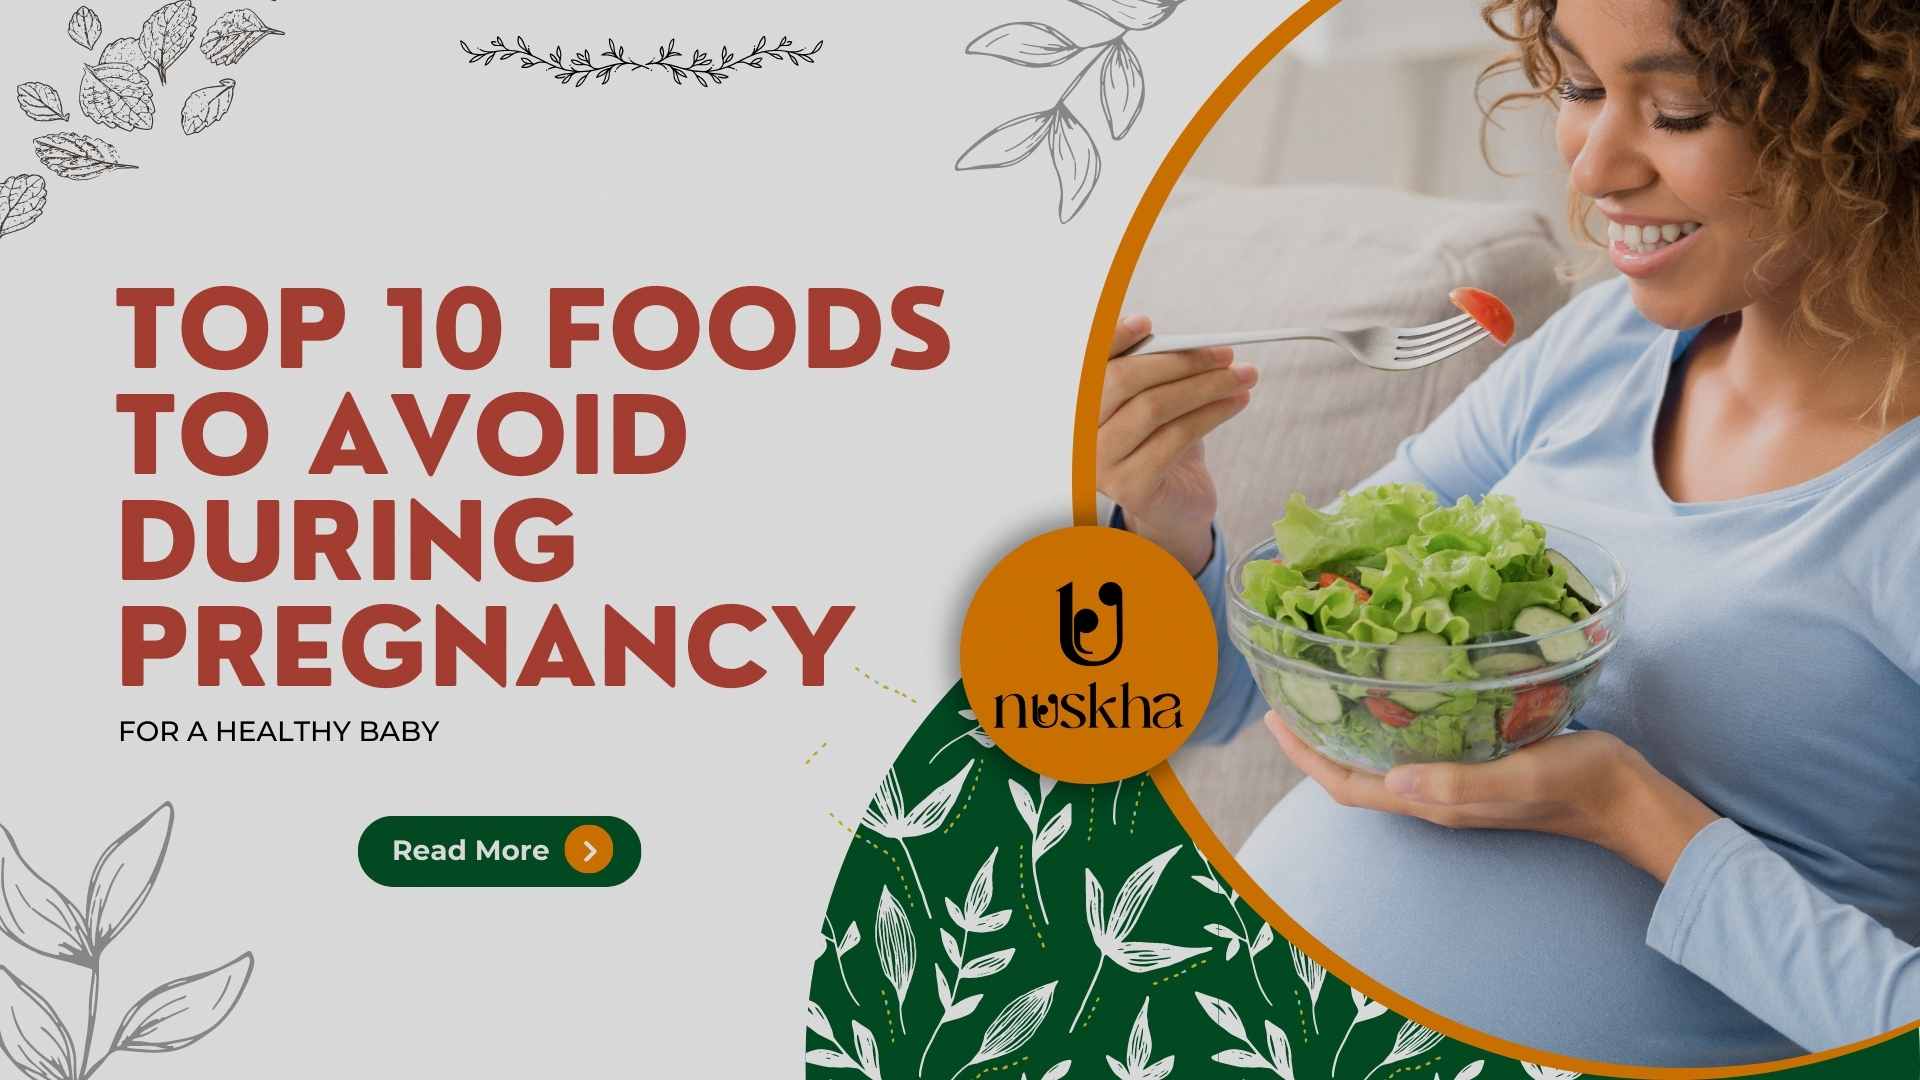 Top 10 Foods to Avoid During Pregnancy for a Healthy Baby